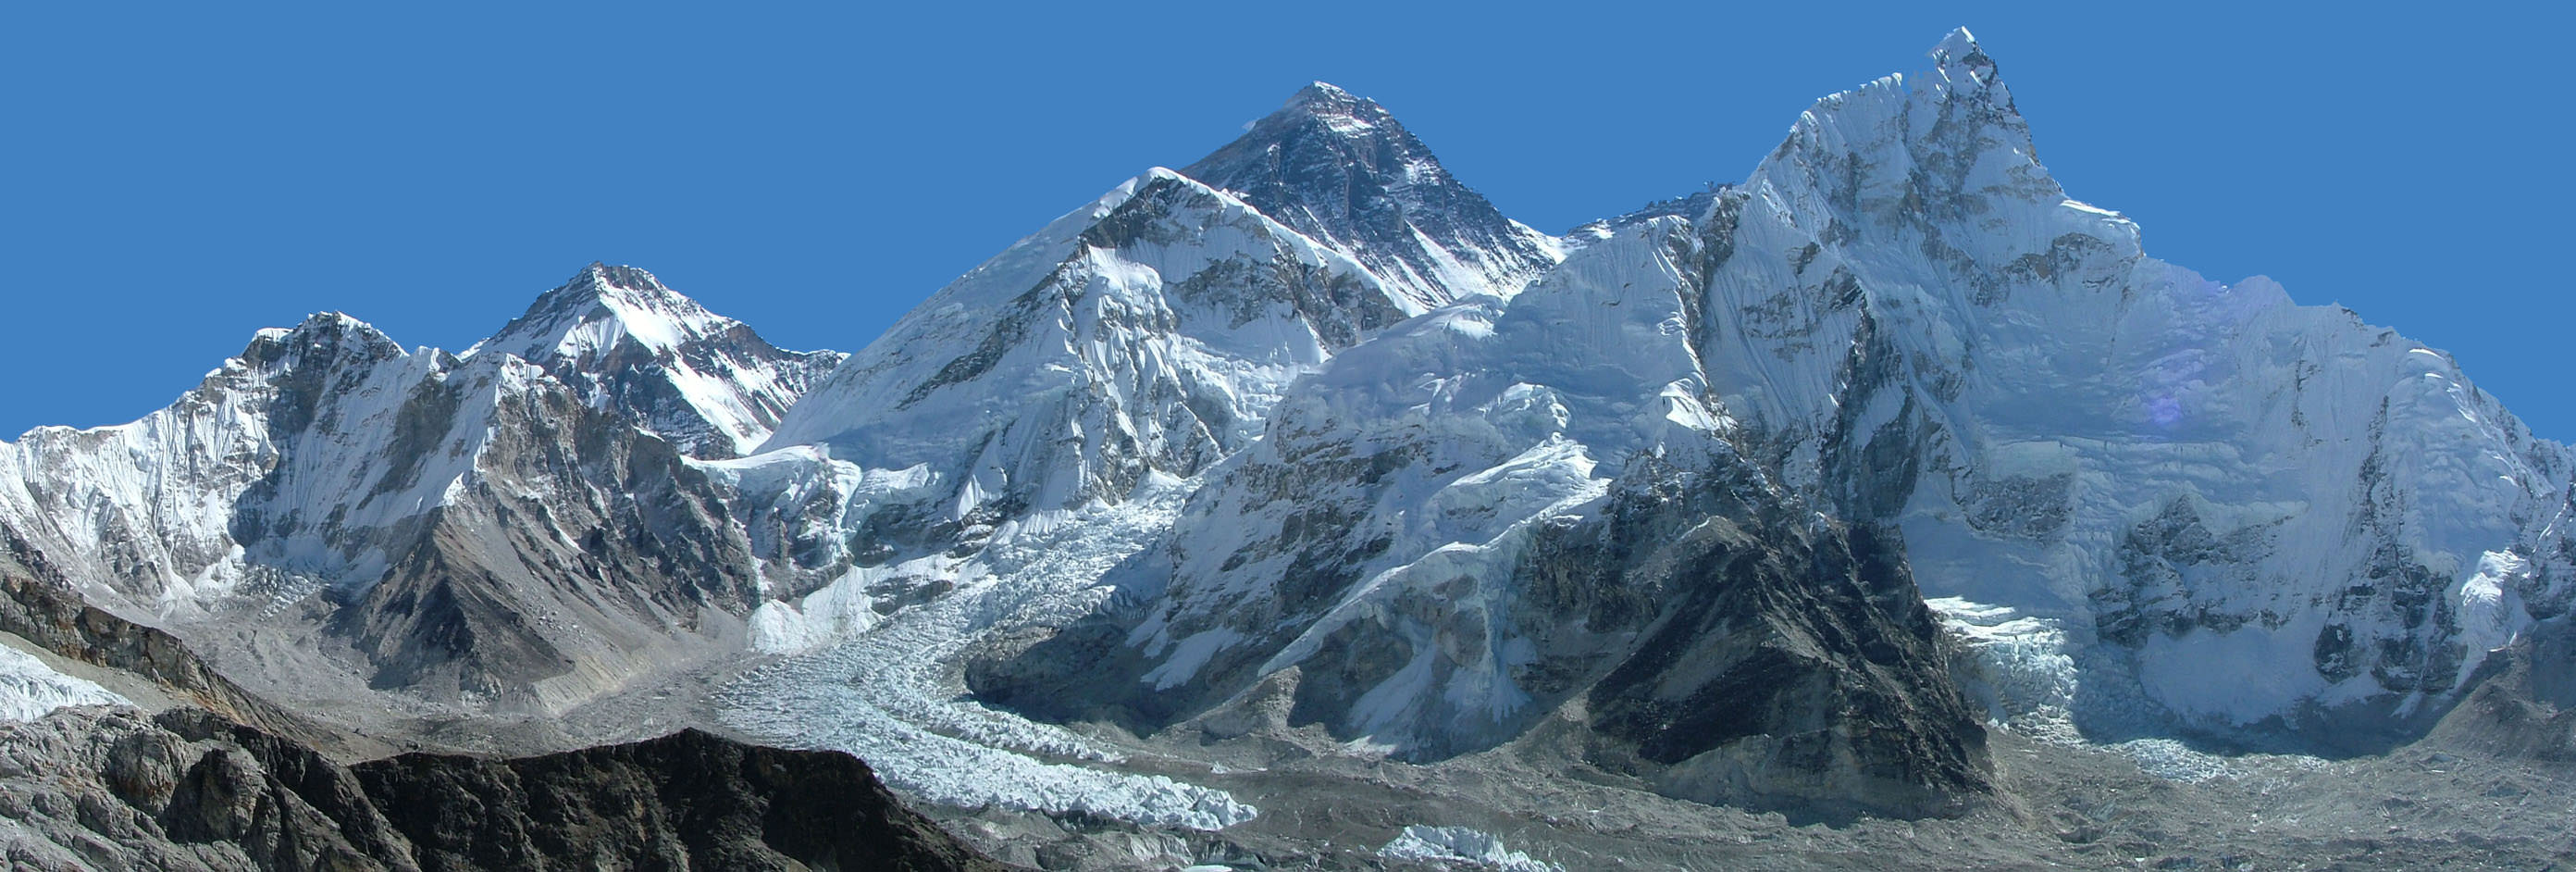 Mount Everest panoramic view